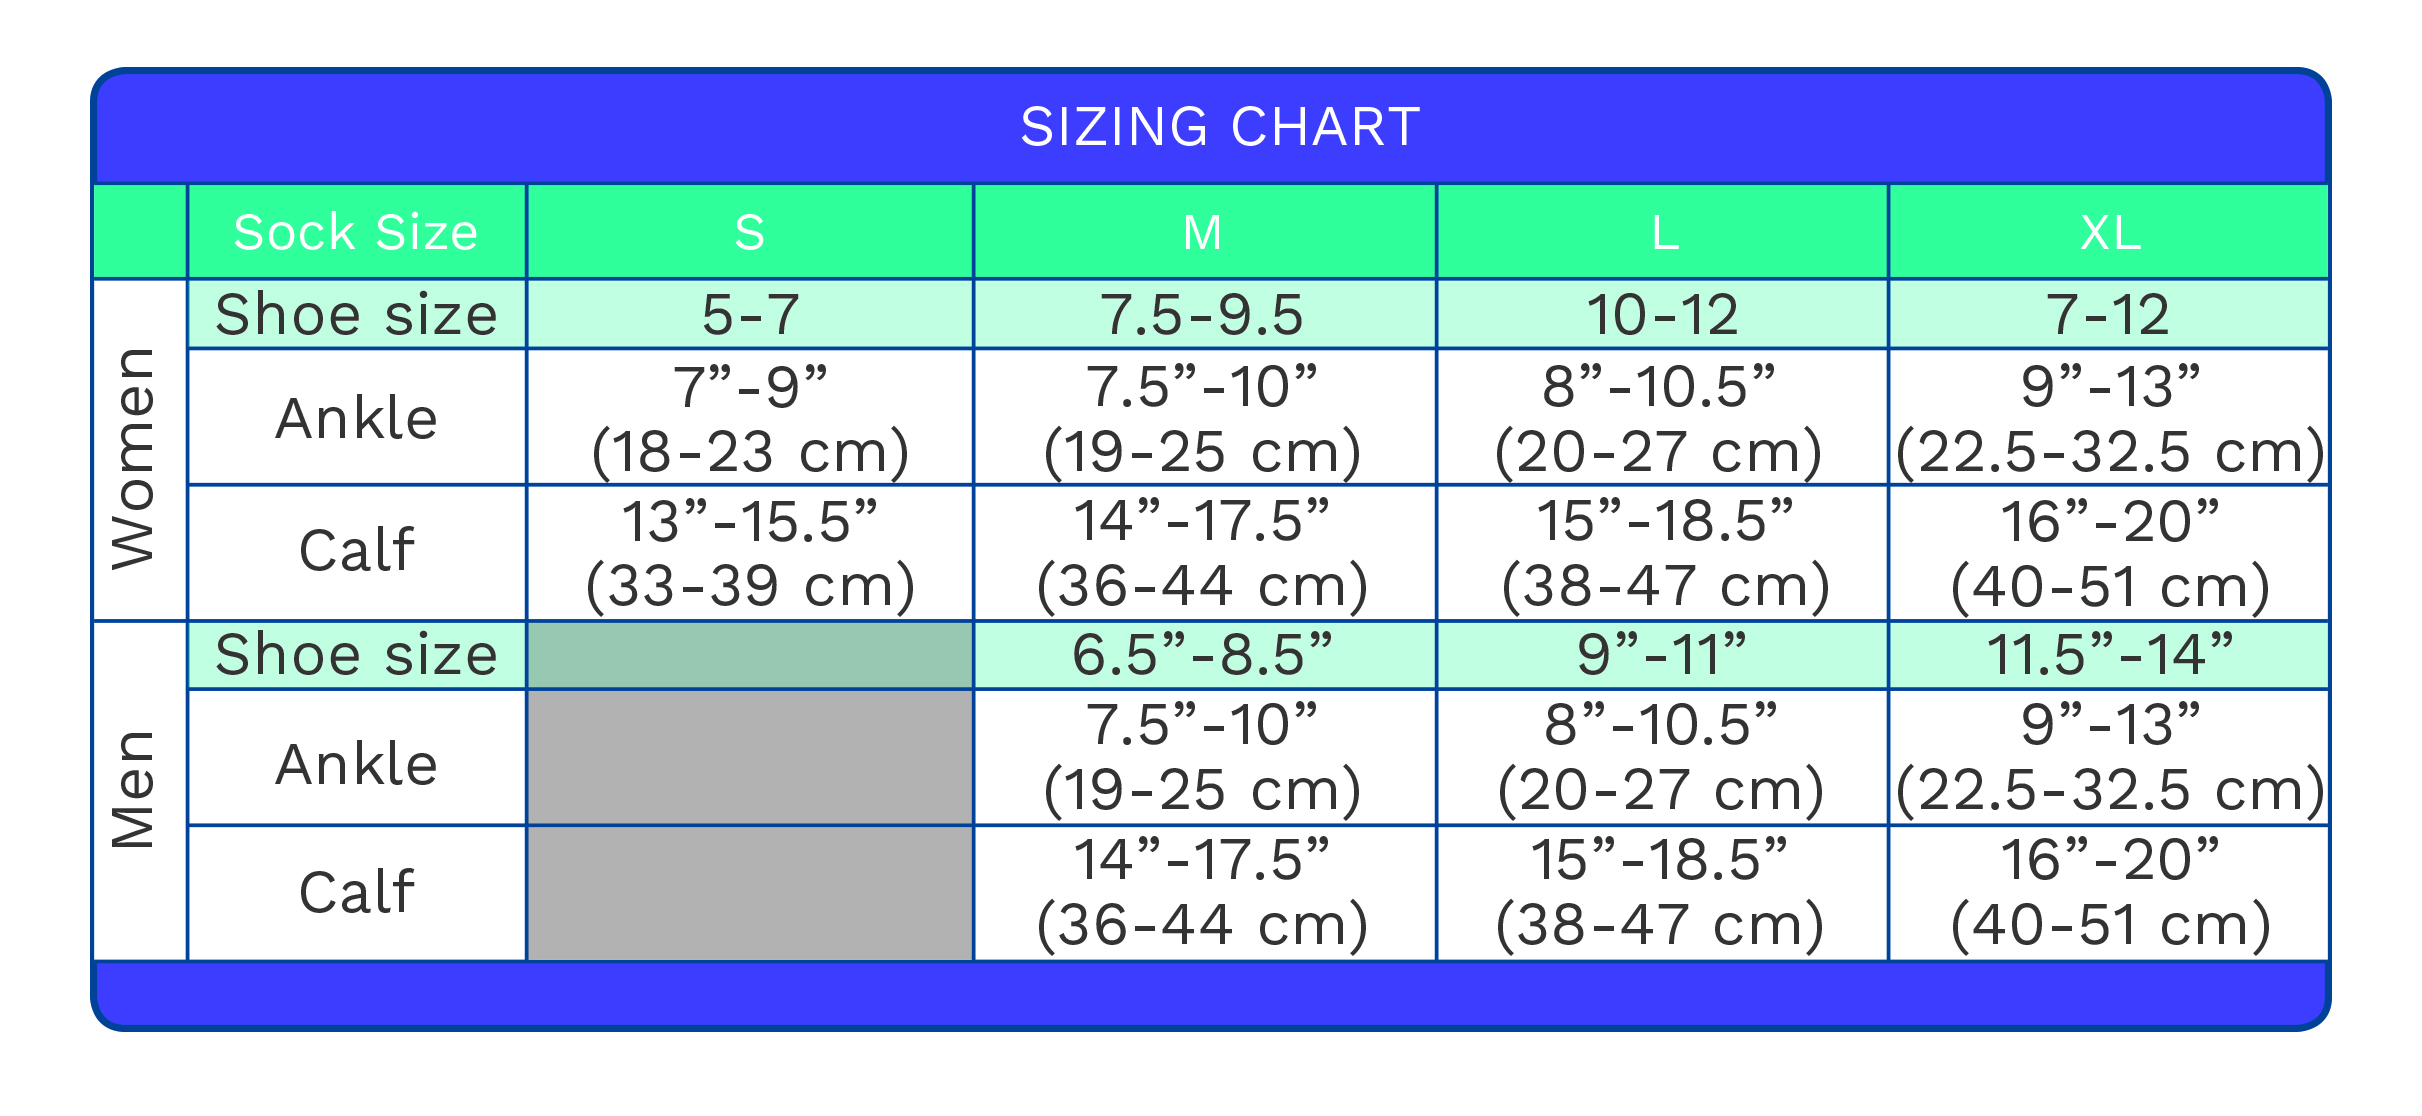 Dr Segals Sizing Chart